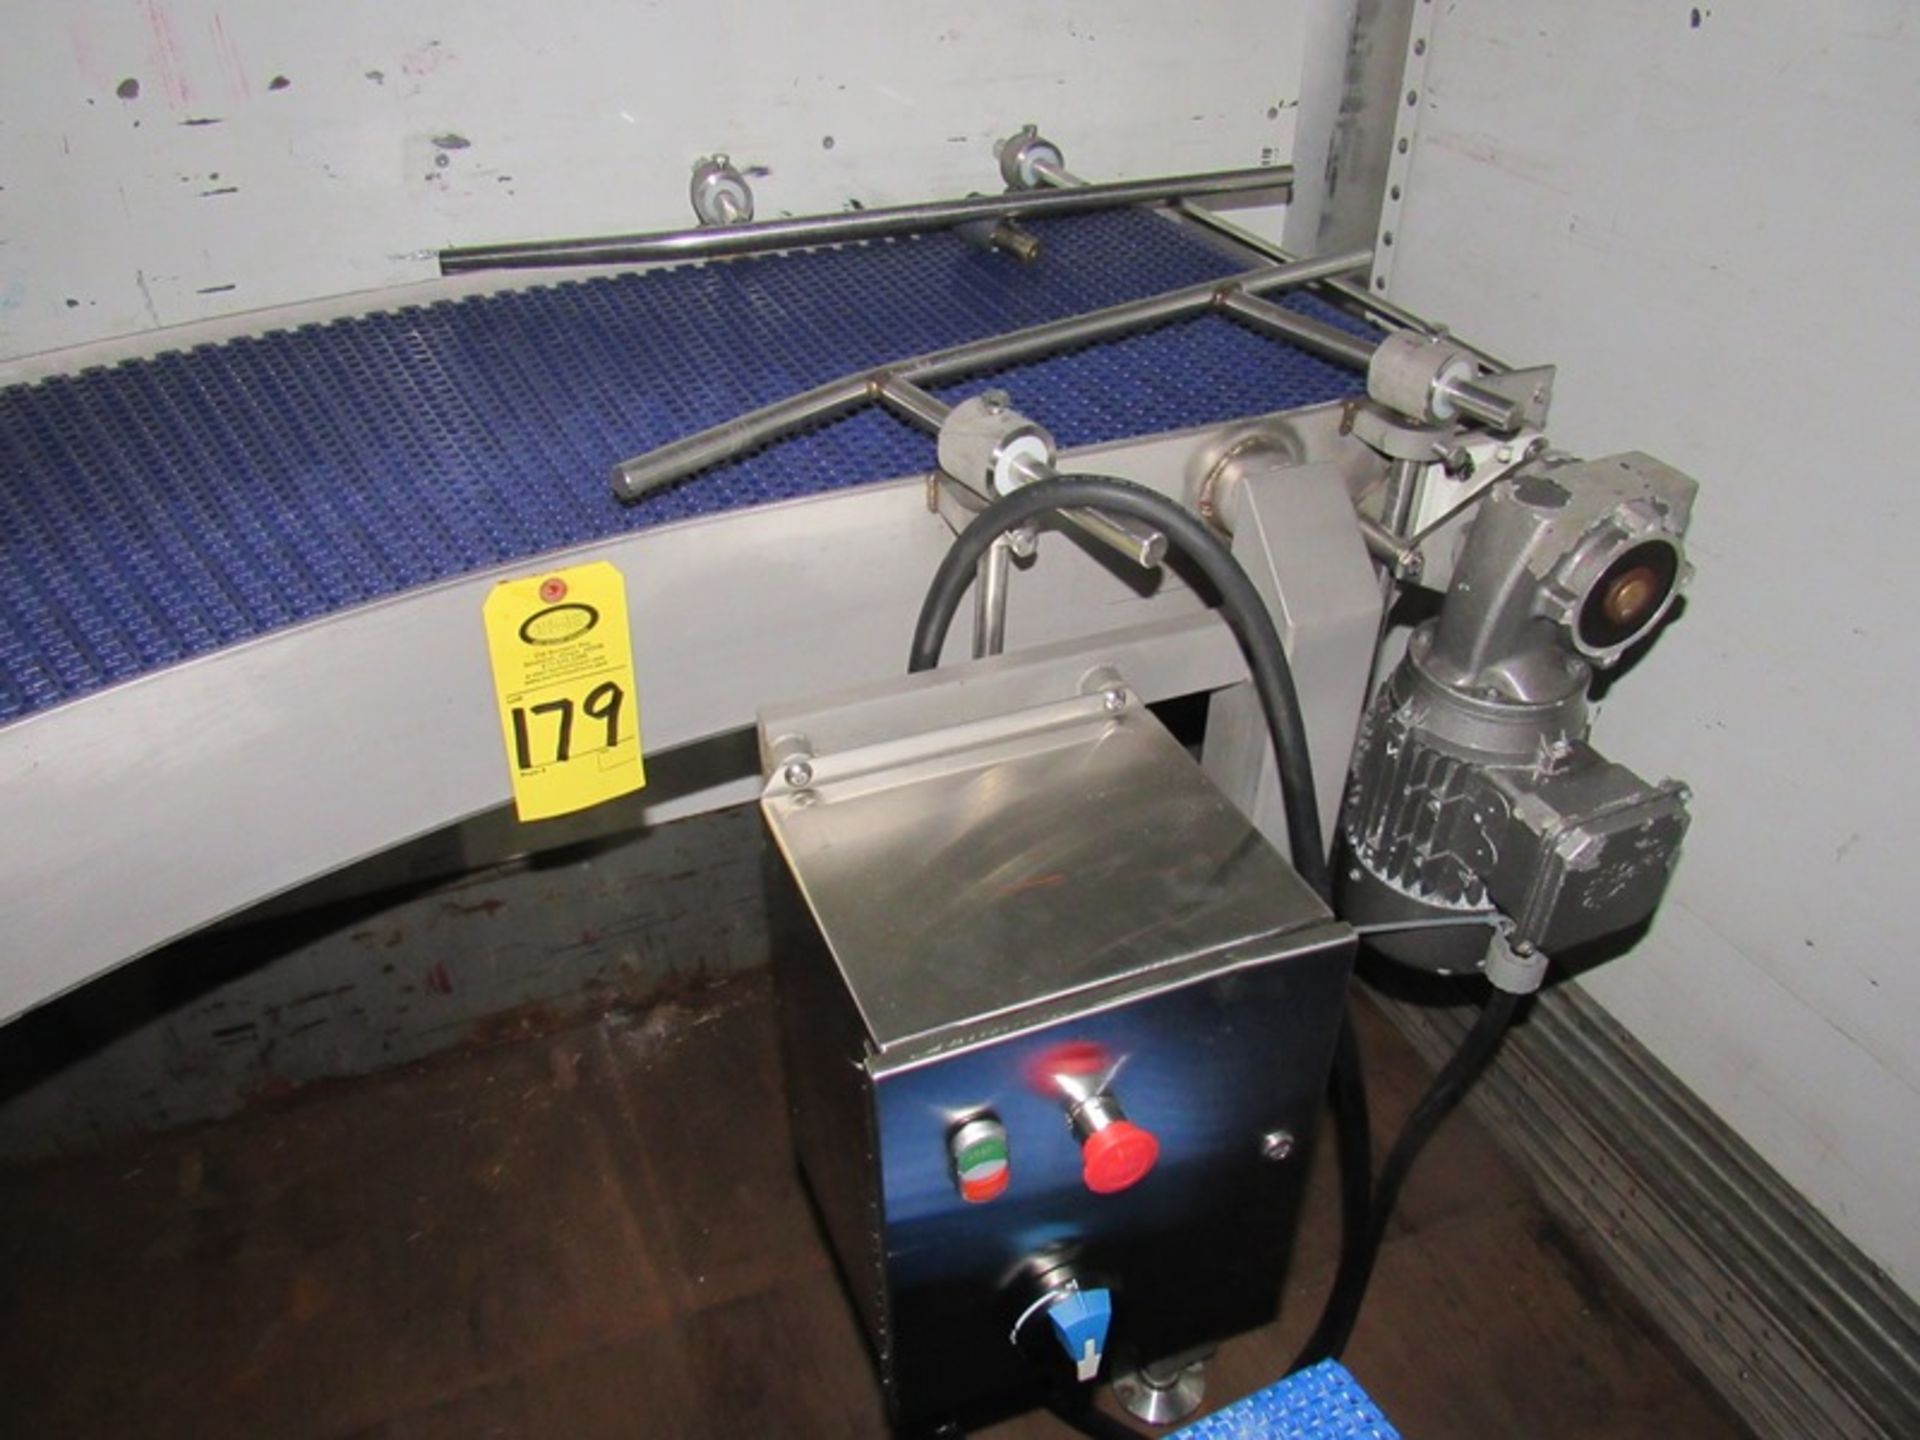 Stainless Steel 90º Conveyor, 19 1/2" W X 20' L blue belt, 12' to turn (Late Pickup Only - March - Image 5 of 5